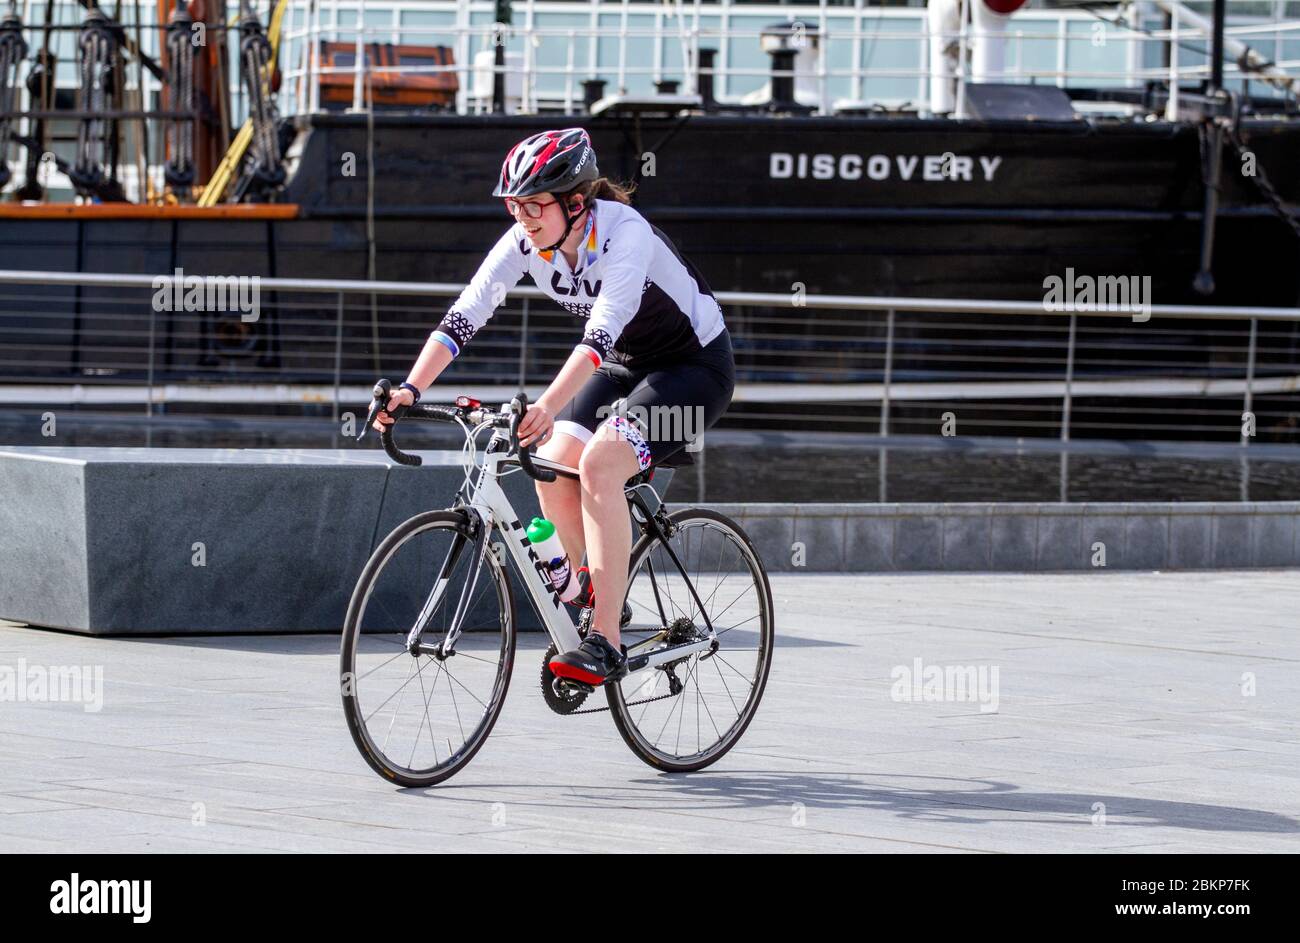 Dundee, Tayside, Scotland, UK. 5th May, 2020. UK Weather: Warm and sunny morning in Dundee with temperatures reaching 14°C. A female cyclist enjoying the warm sunny weather while taking outdoor exercises cycling past RRS Discovery ship along the waterfront during the Covid-19 lockdown restrictions throughout Scotland. Credit: Dundee Photographics/Alamy Live News Stock Photo